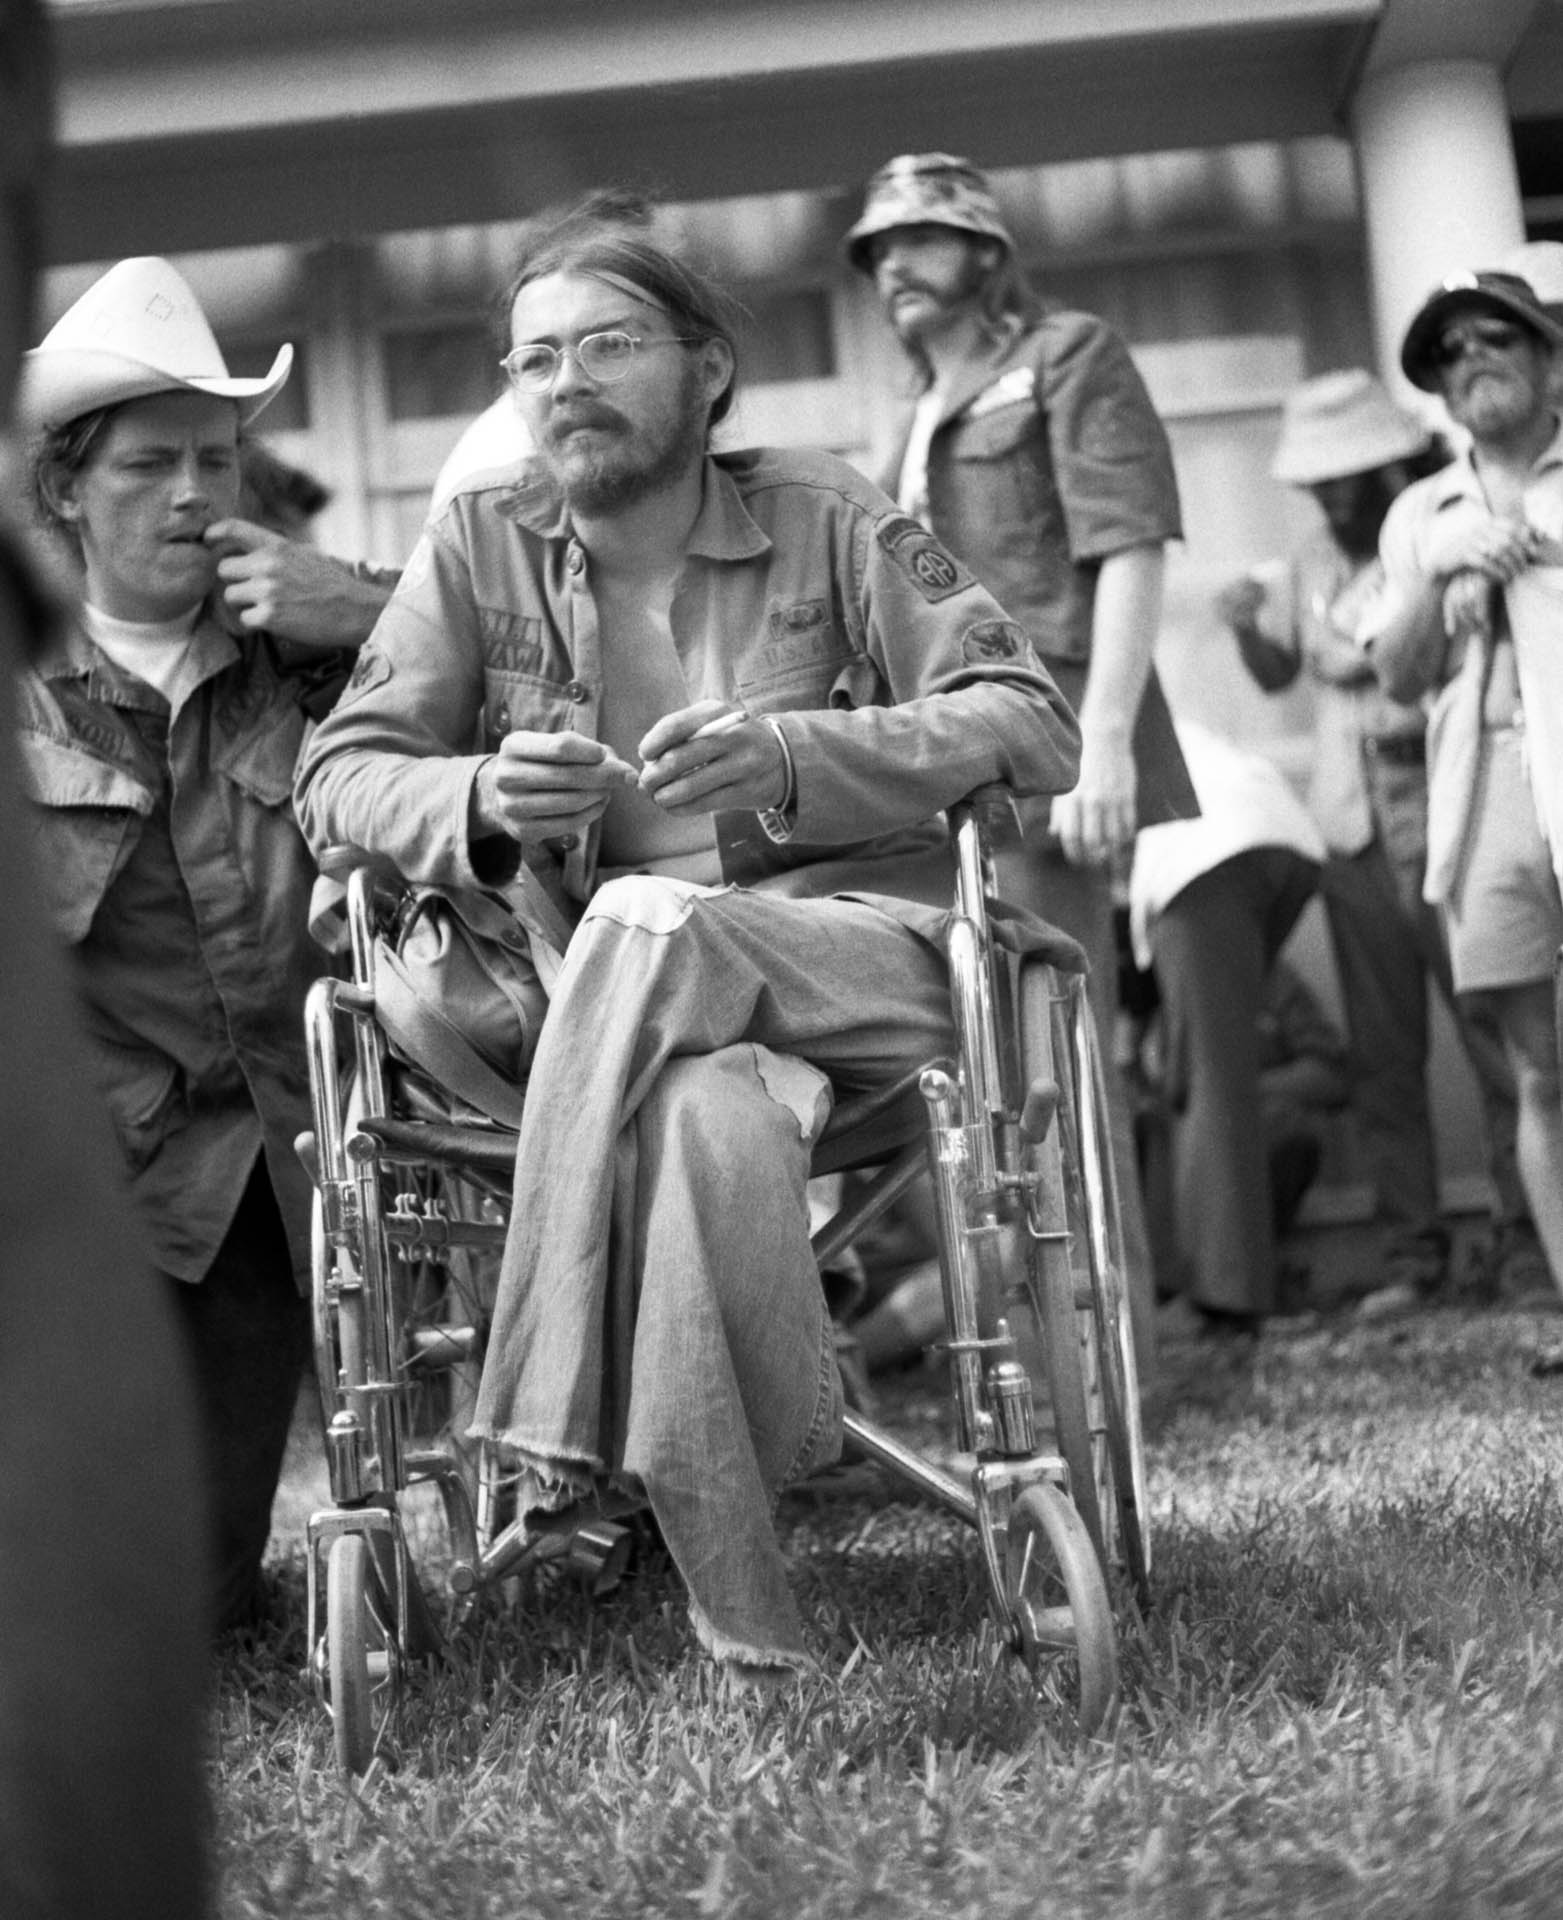 Wounded soldier from Vietnam Veterans Against the War (VVAW) in a wheelchair during protests against the RNC. He was one of over 200,000 U.S. casualties in that war.